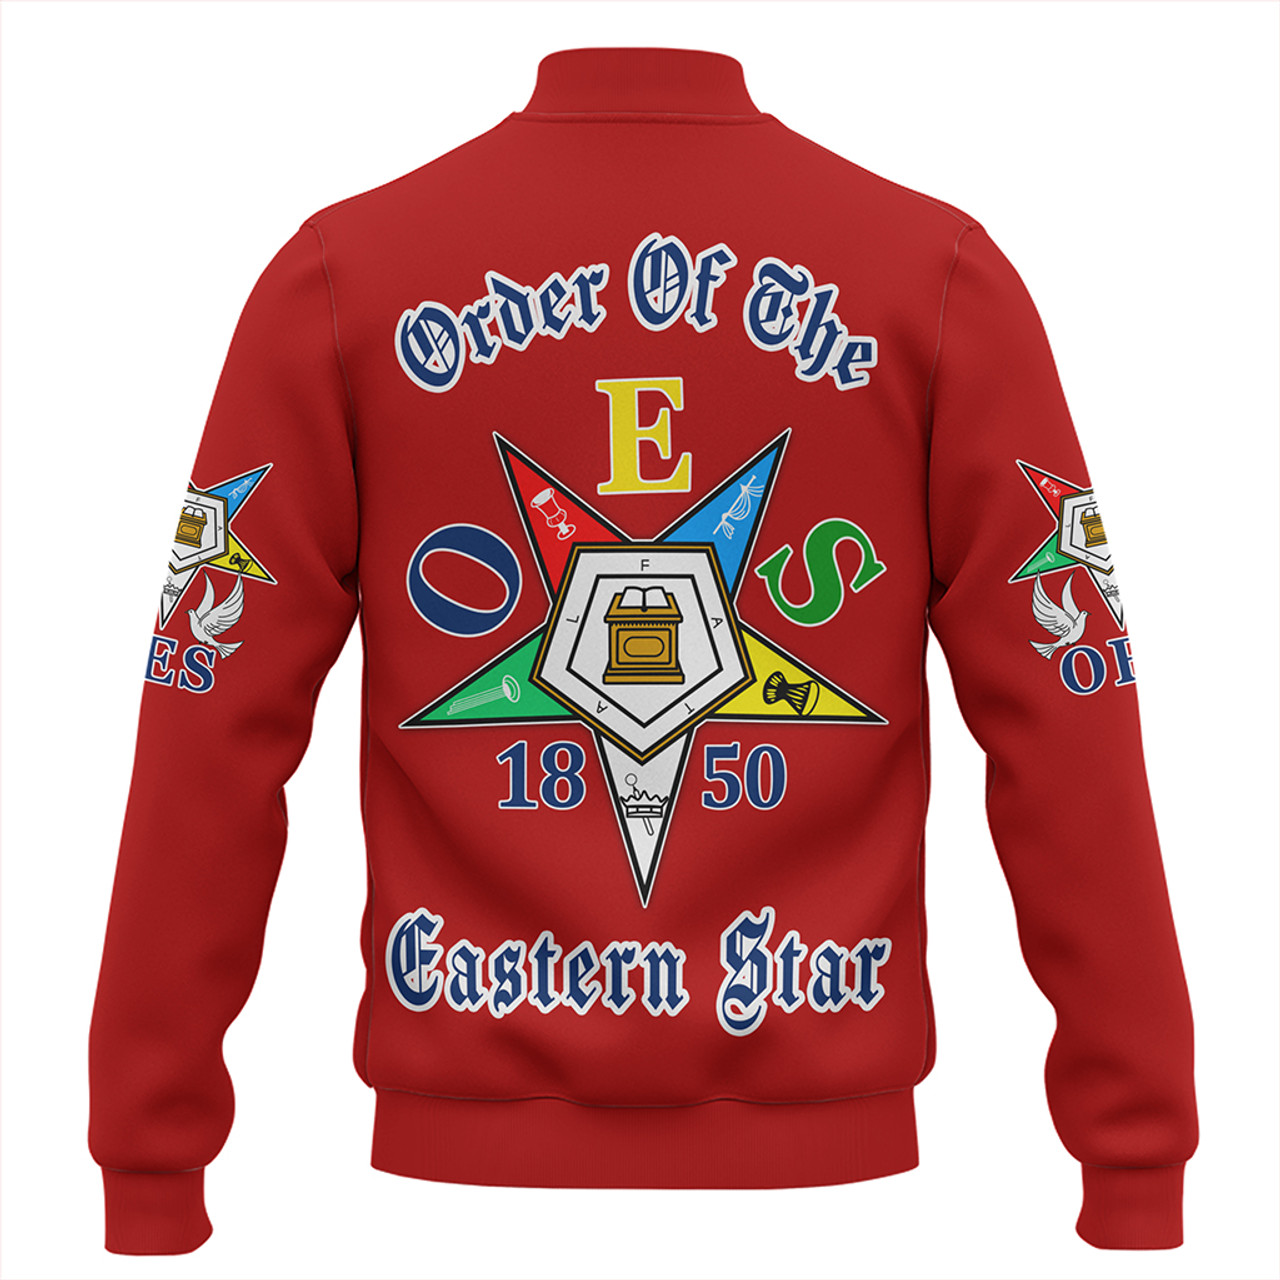 Order of the Eastern Star Baseball Jacket Pearls Red